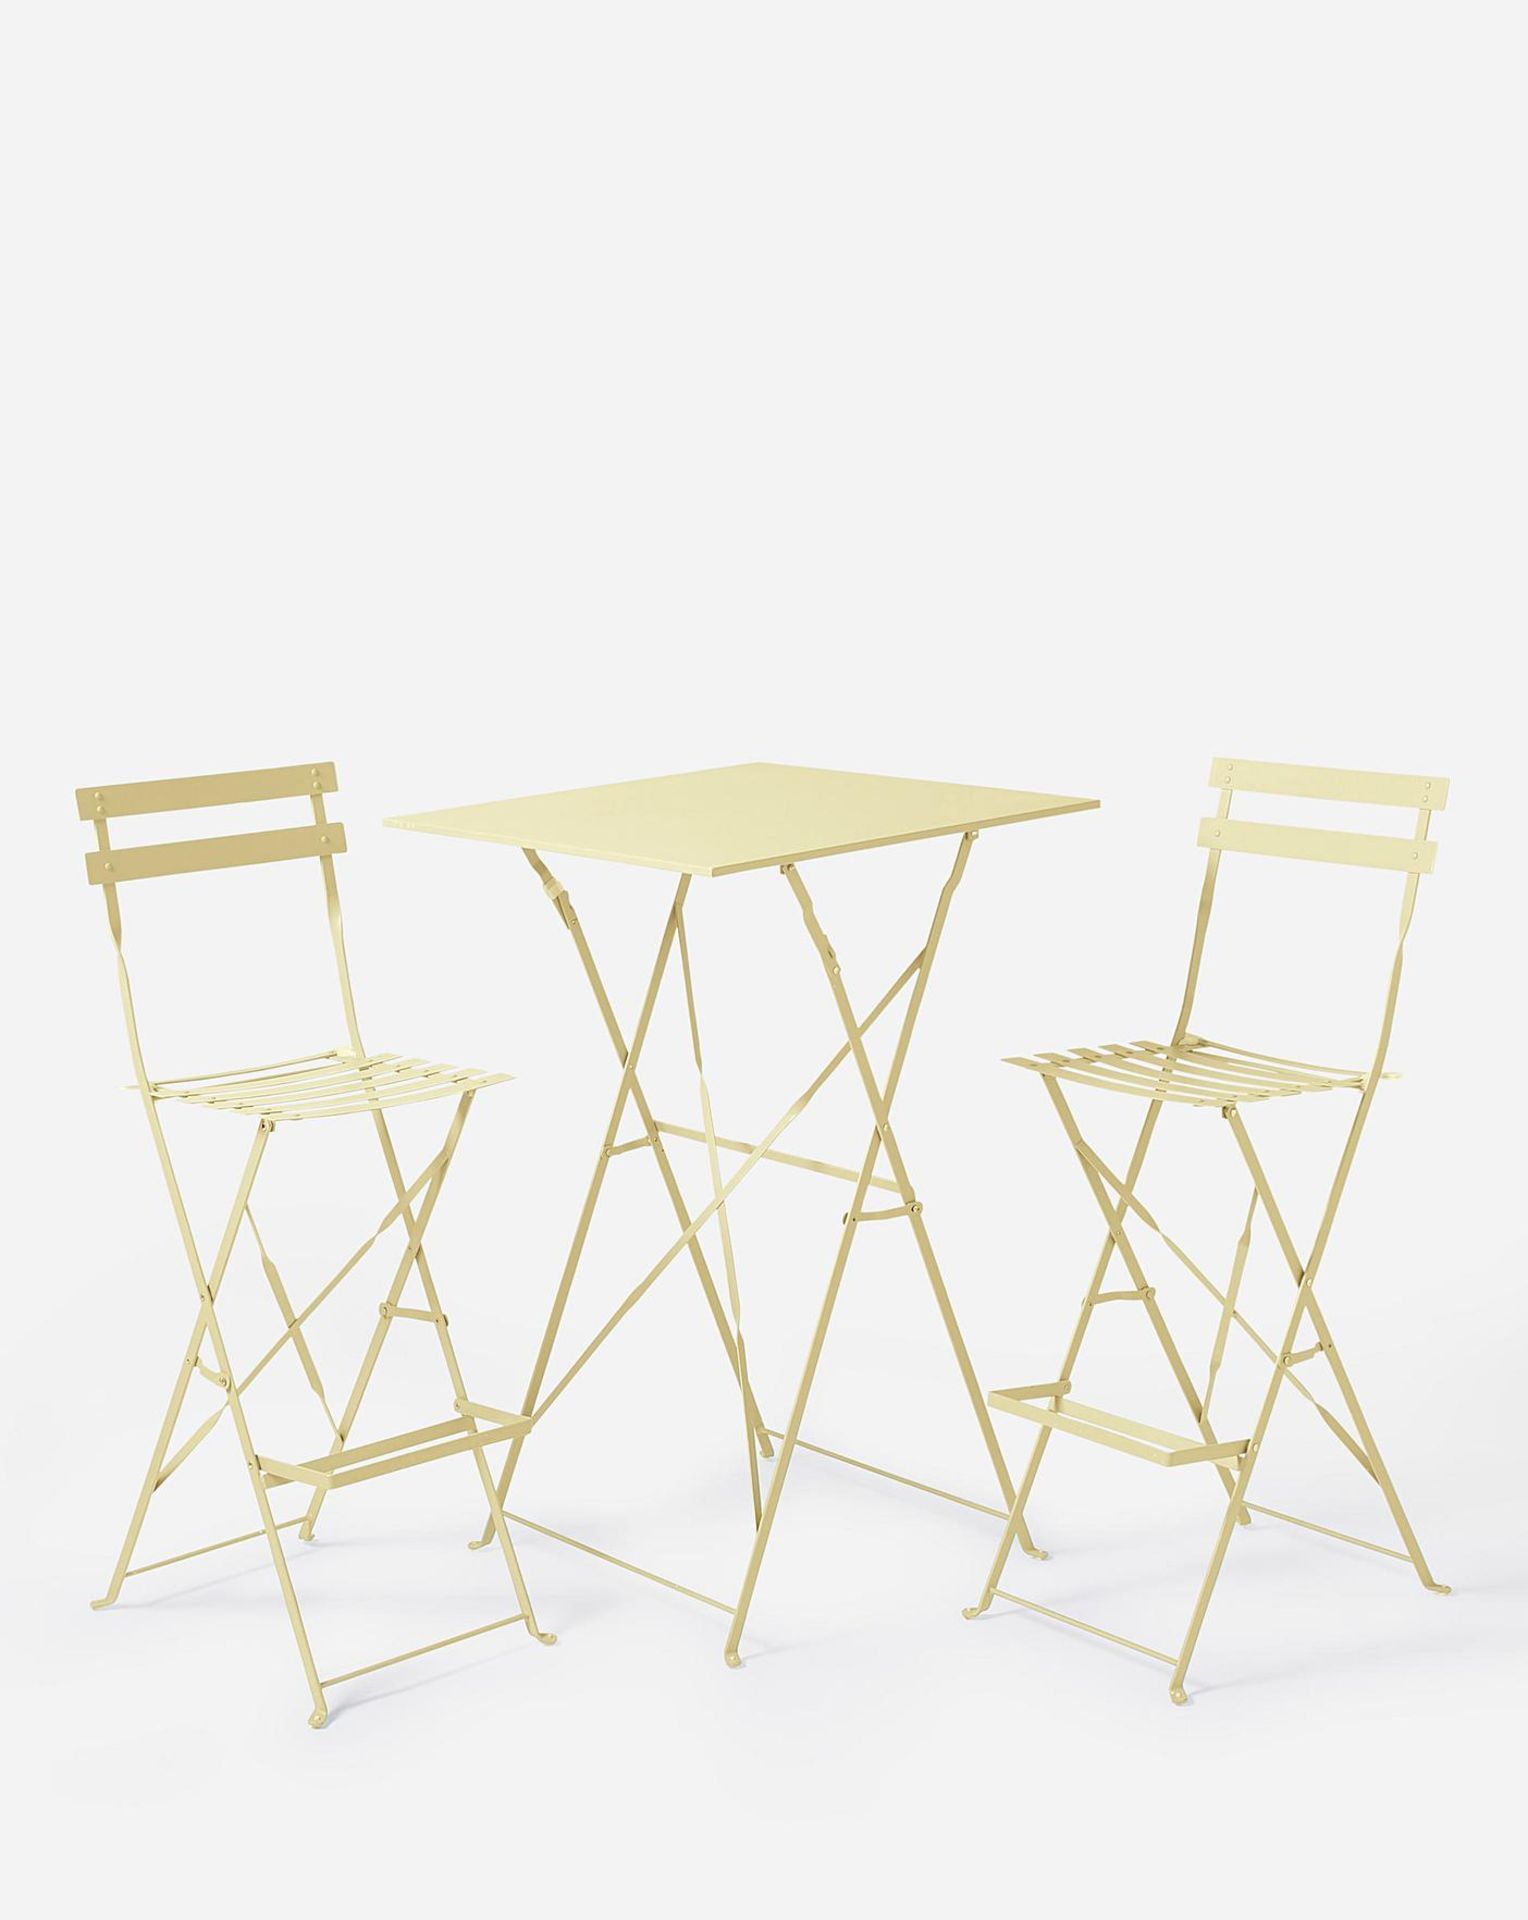 BRAND NEW Palma Bistro Bar Set - DUSK CITRON. RRP £199 EACH. Liven up your garden or balcony with - Image 2 of 3